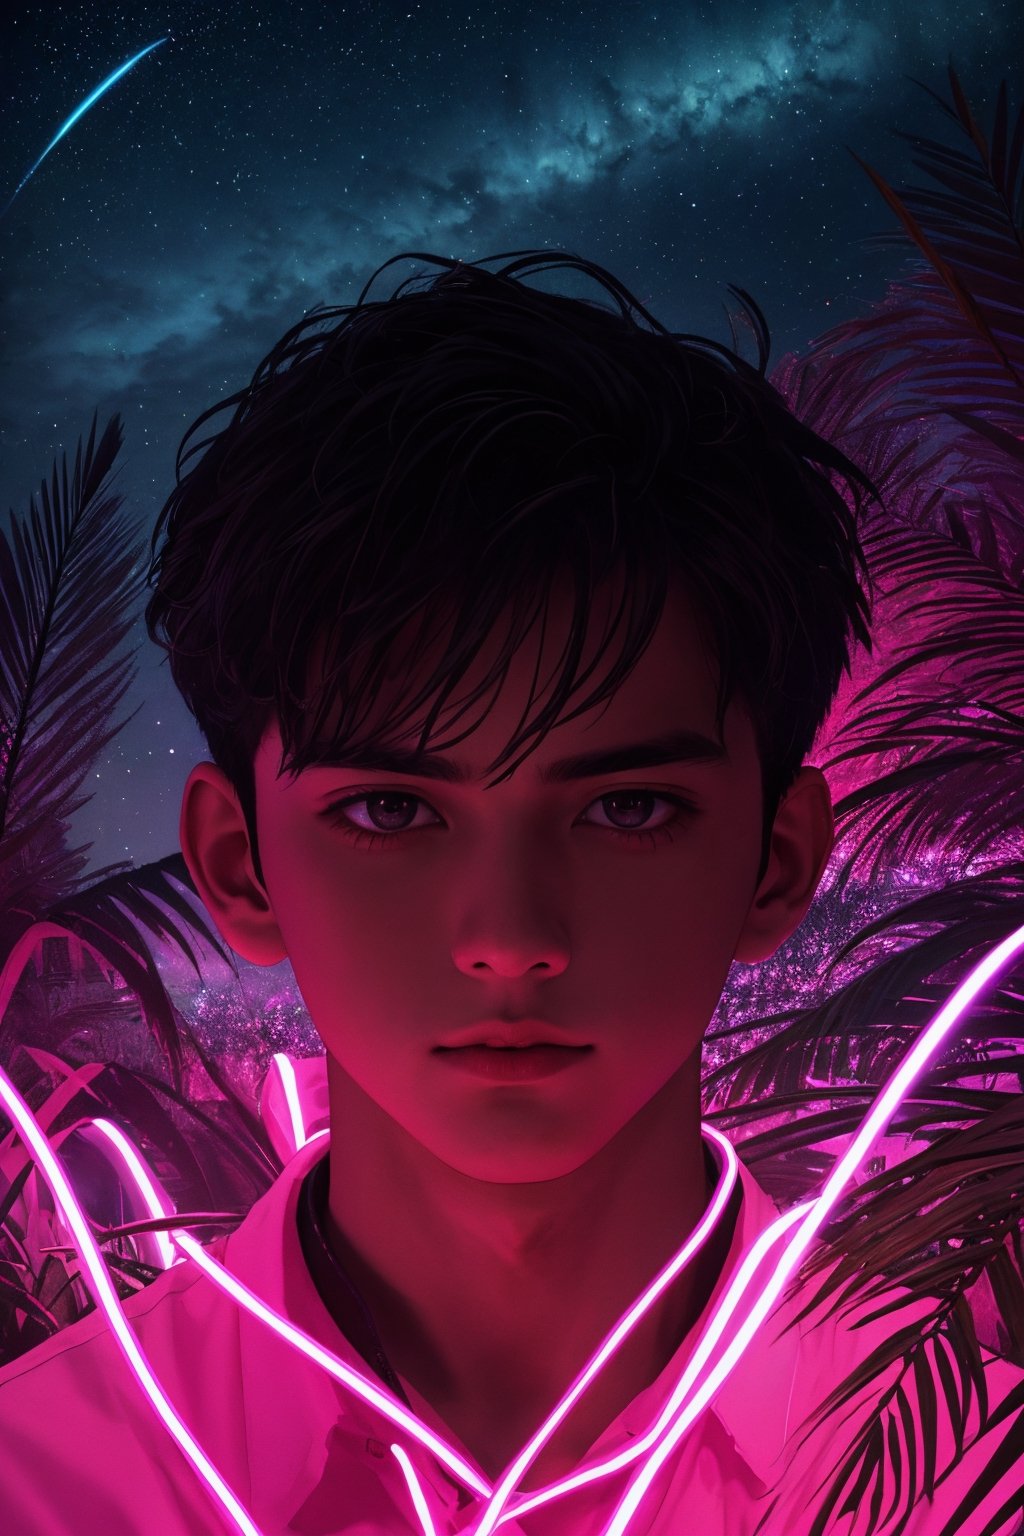 (best quality, 8K, ultra-detailed, masterpiece), (ultra-realistic, photorealistic), A breathtaking 8K solo portrait capturing the essence of a young boy in a synthwave art style, with a close-up view. His gaze fixated on the distant horizon, illuminated by a neon yellow glow (1.2), the night enveloping him in a dark theme. Above, a starry sky twinkles with bioluminescence, symbolizing his fortitude and wholesome spirit. The artwork is destined to be a poster, with palm leaves framing the composition, creating an unforgettable and mesmerizing masterpiece.